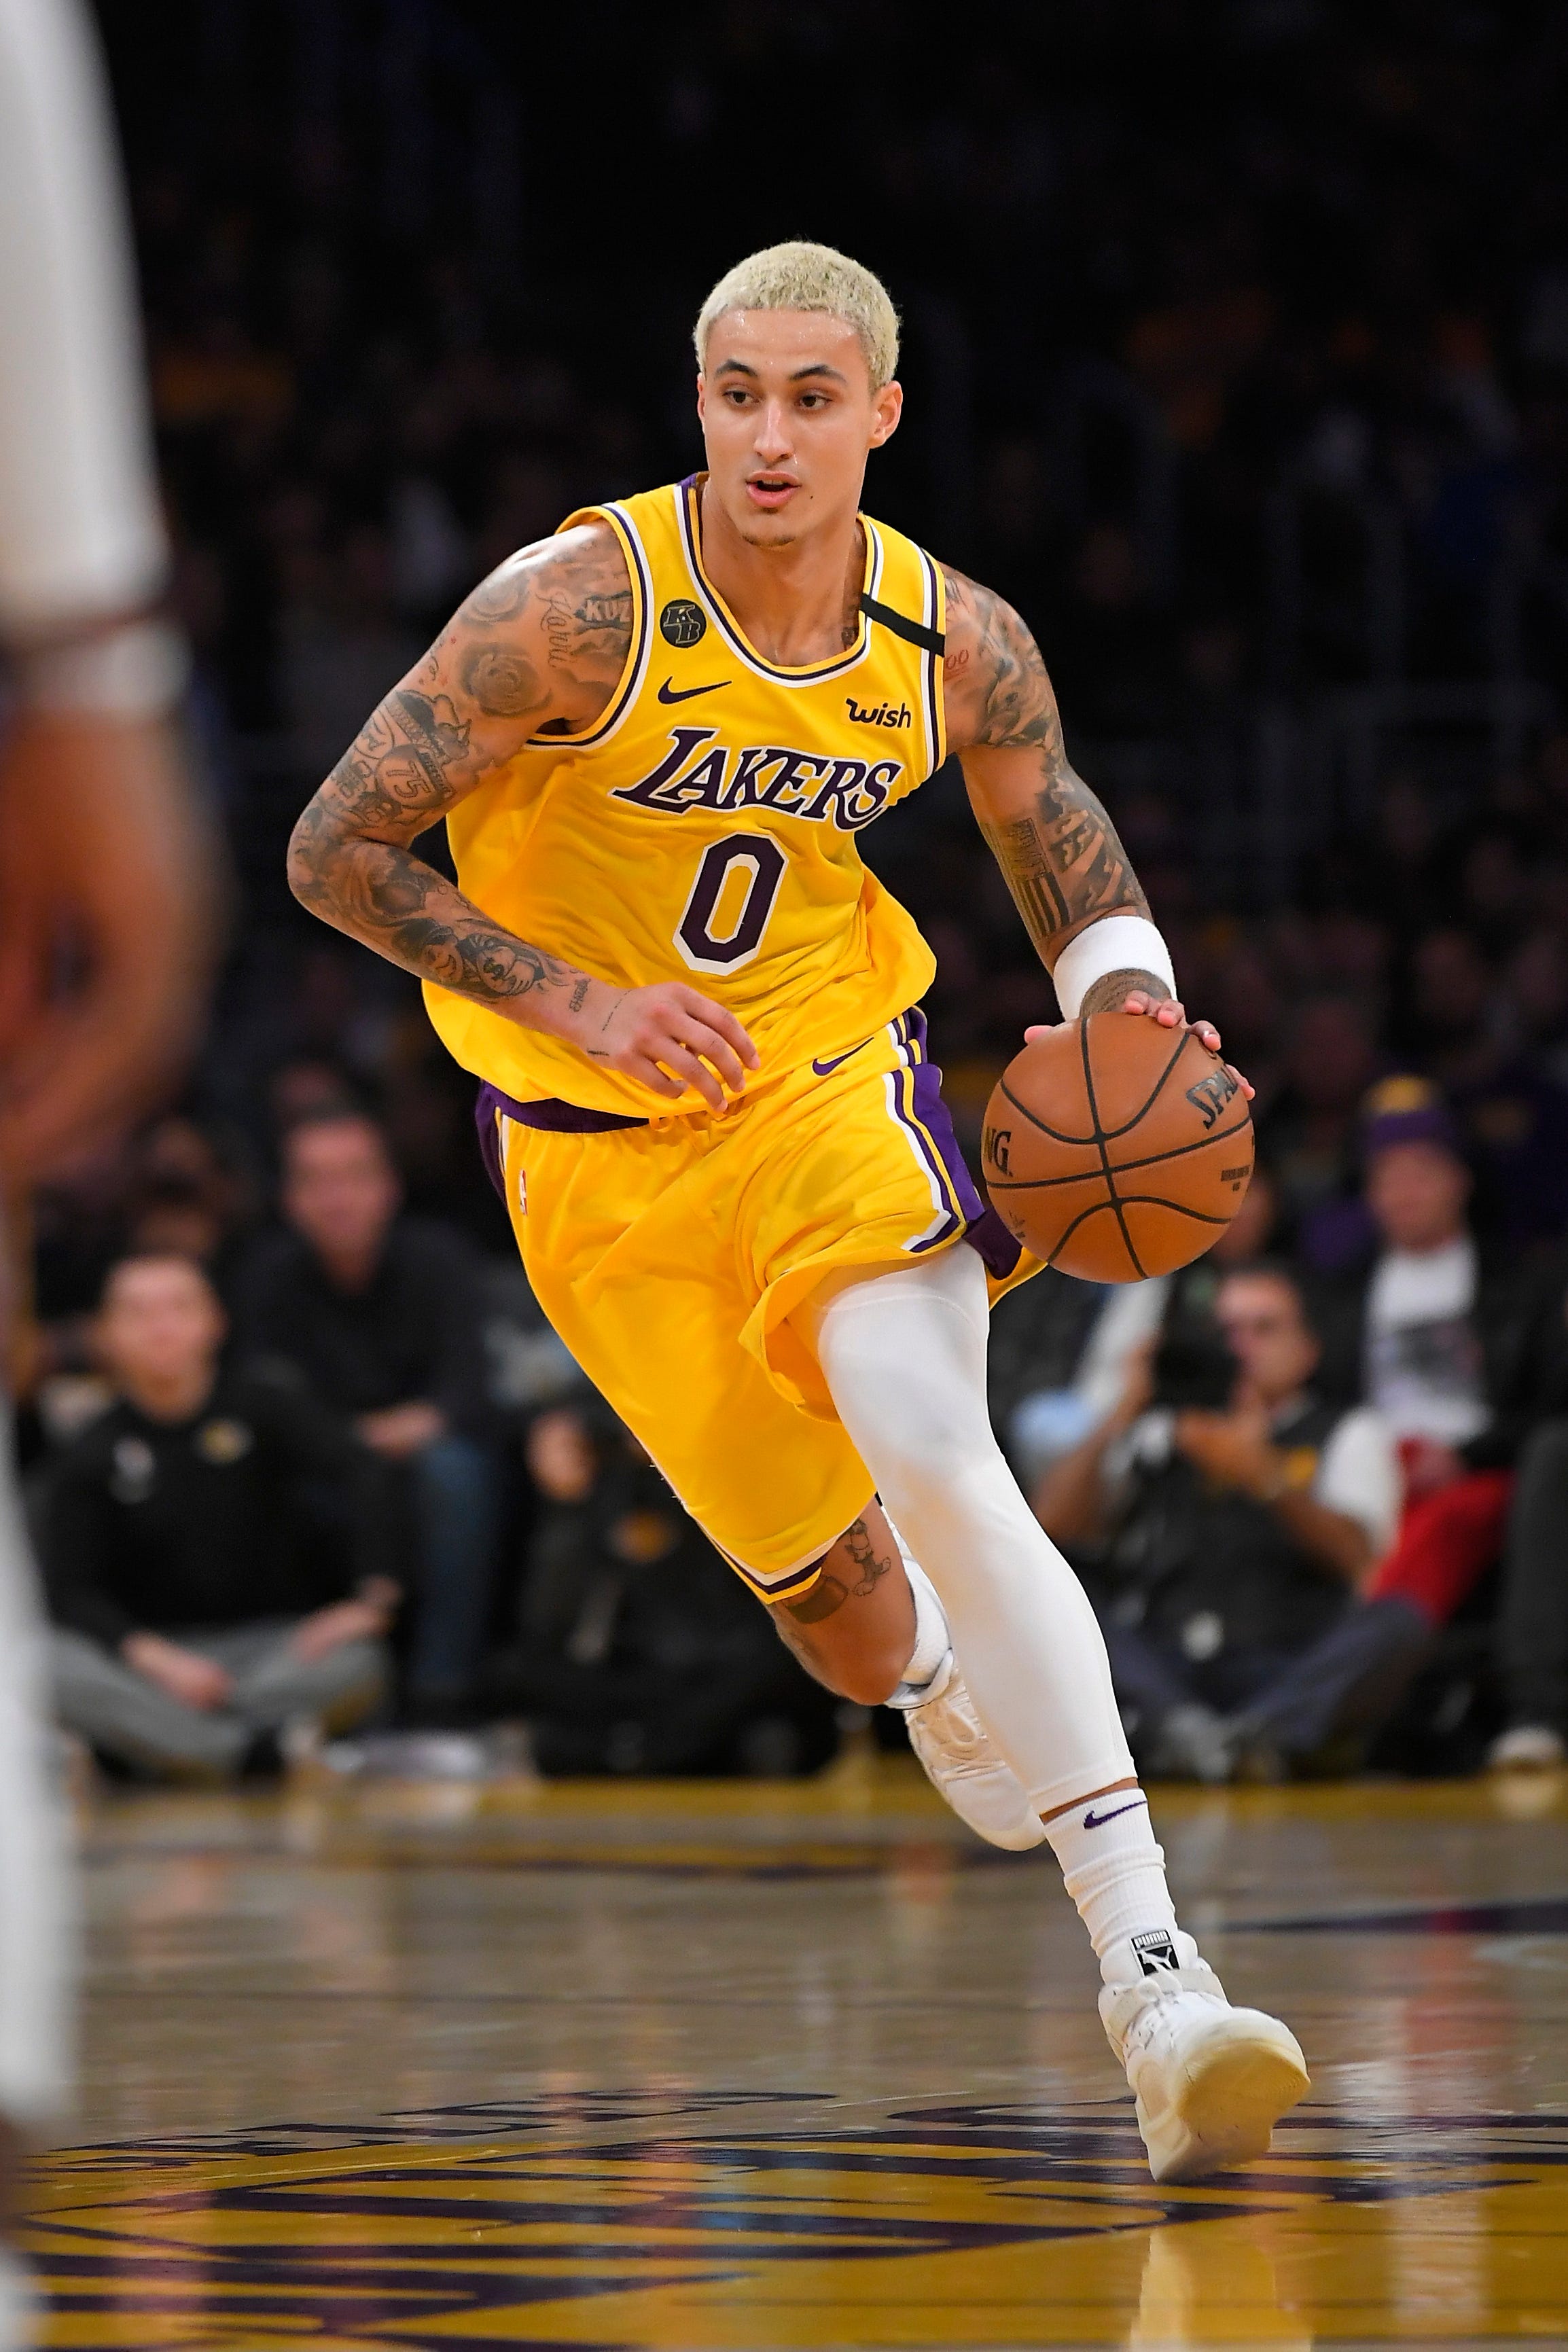 Kyle kuzma is an american basketball player for the los angeles lakers of t...